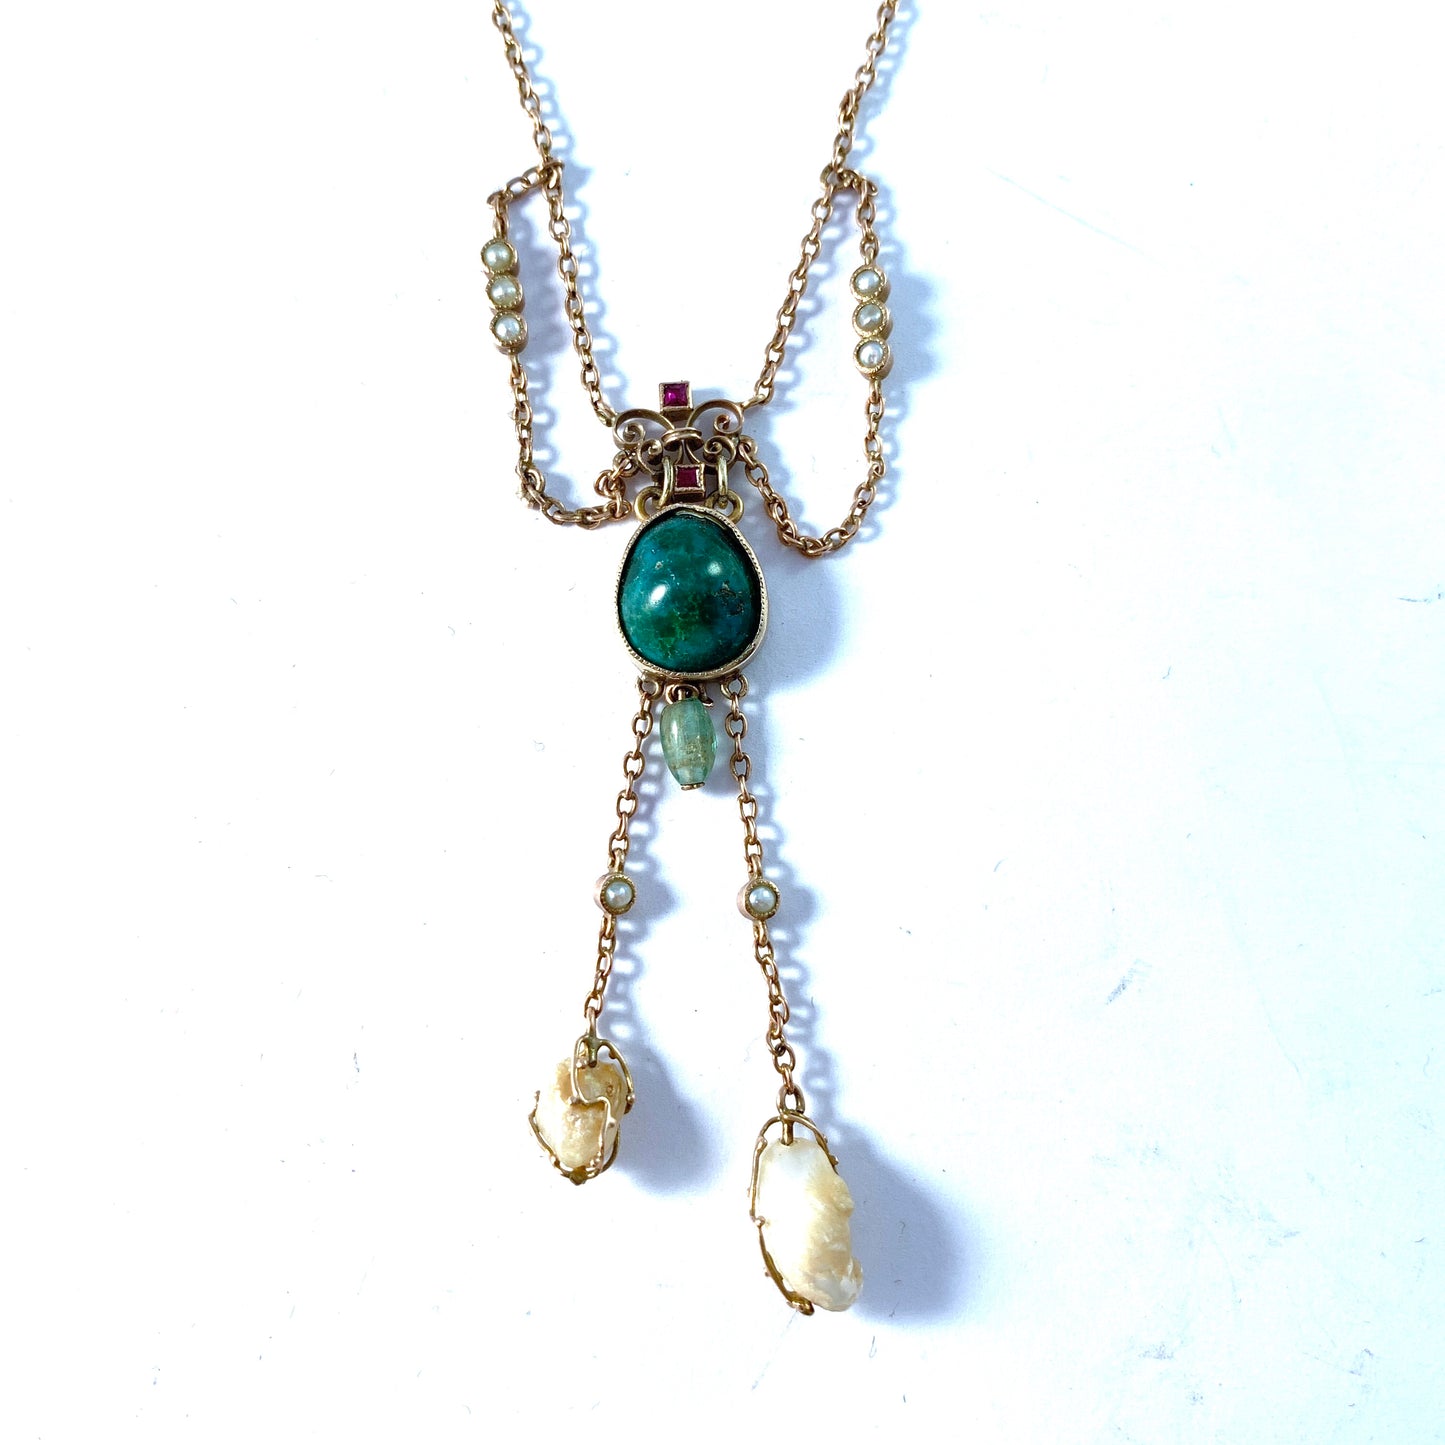 Antique Edwardian 9k Gold Turquoise Tourmaline Pearl Negligee Necklace.